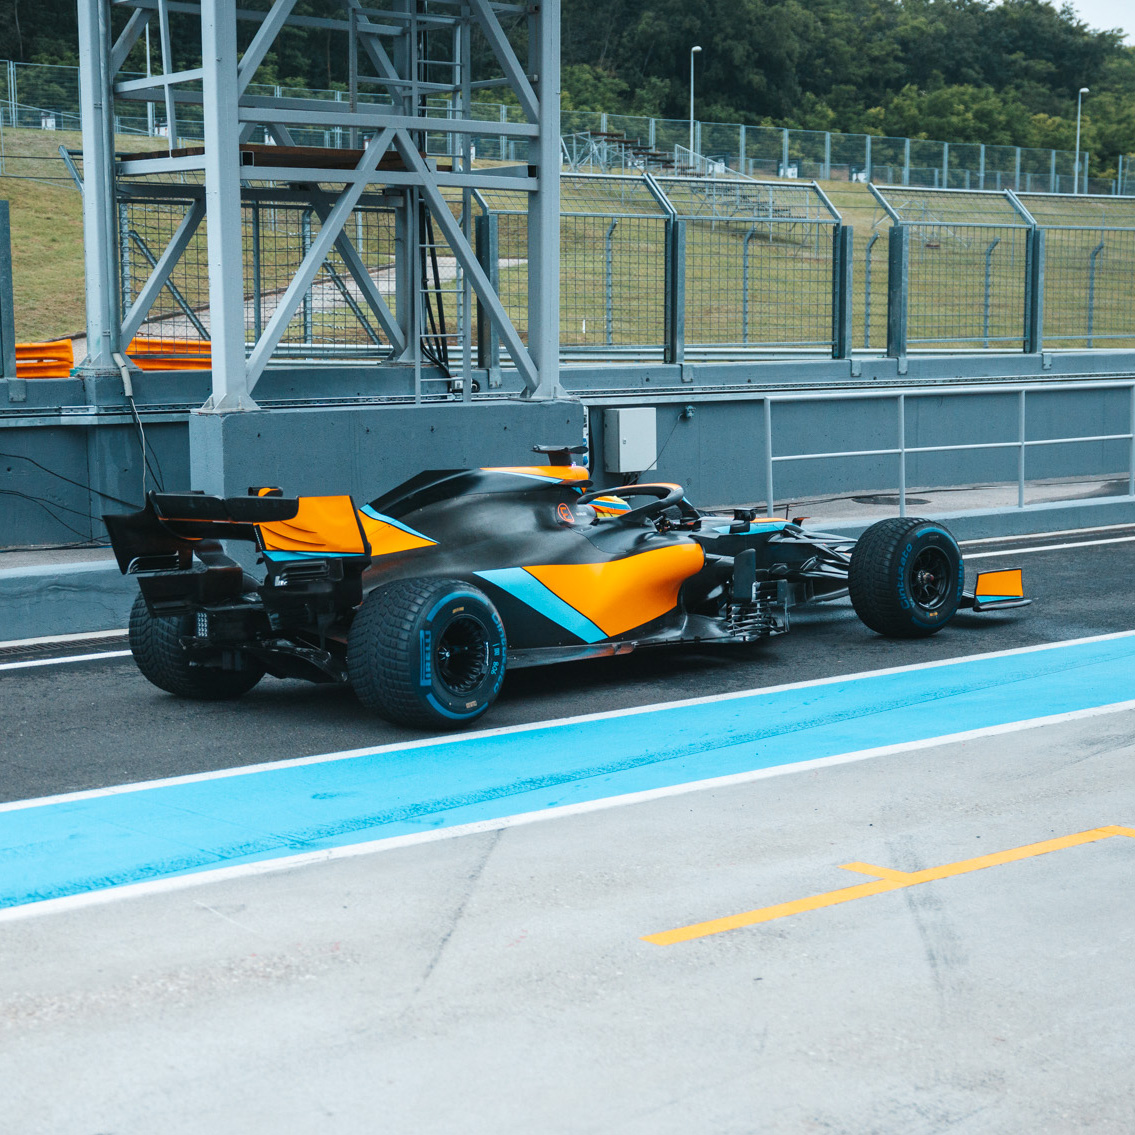 PALOU ‘REALLY HAPPY’ AFTER MCLAREN F1 TEST IN HUNGARY